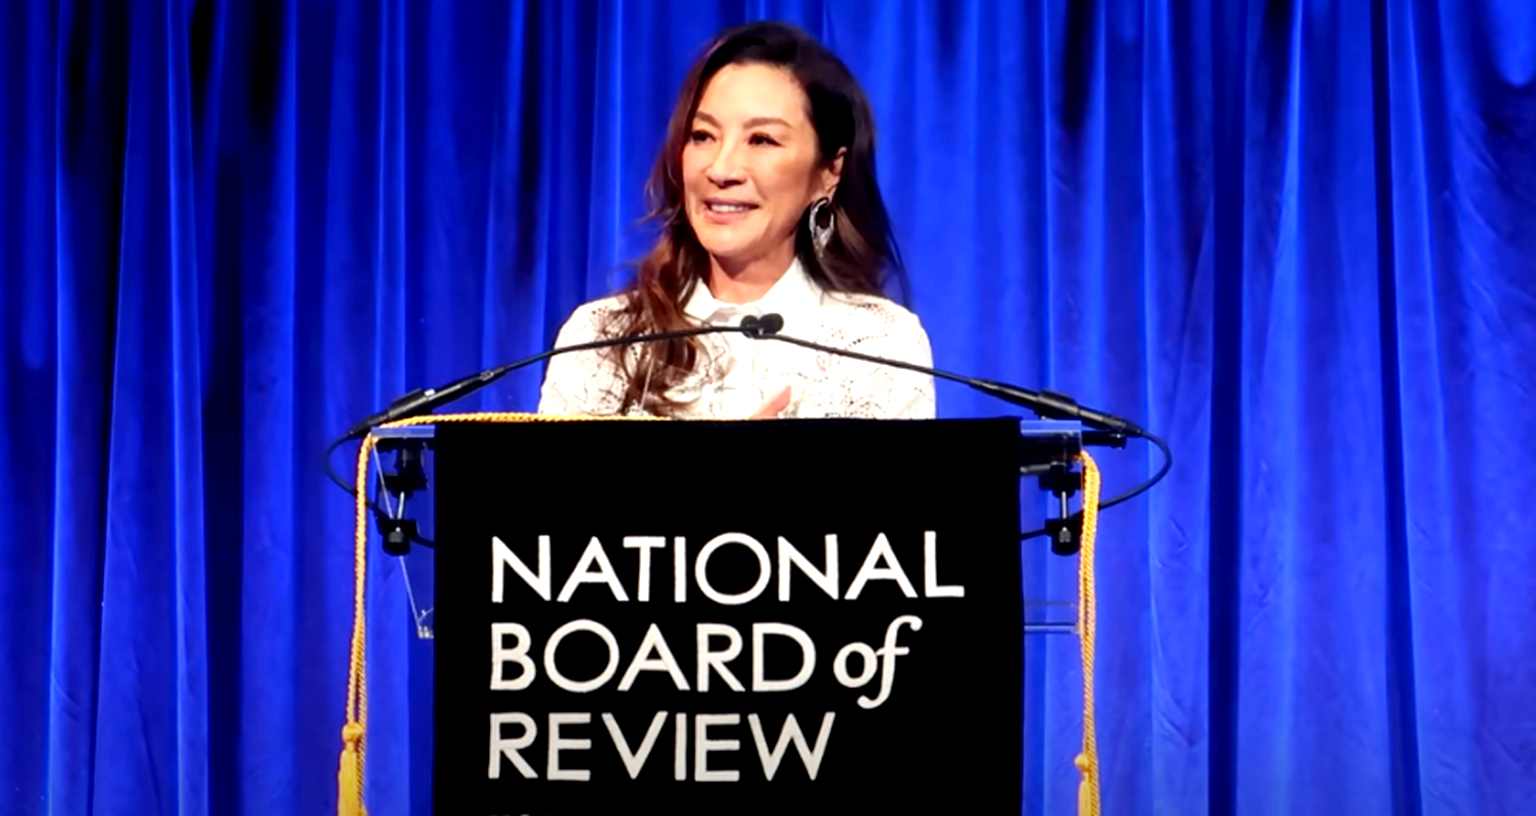 Michelle Yeoh becomes first Asian to win National Board of Review Award for Best Actress in its 45-year history